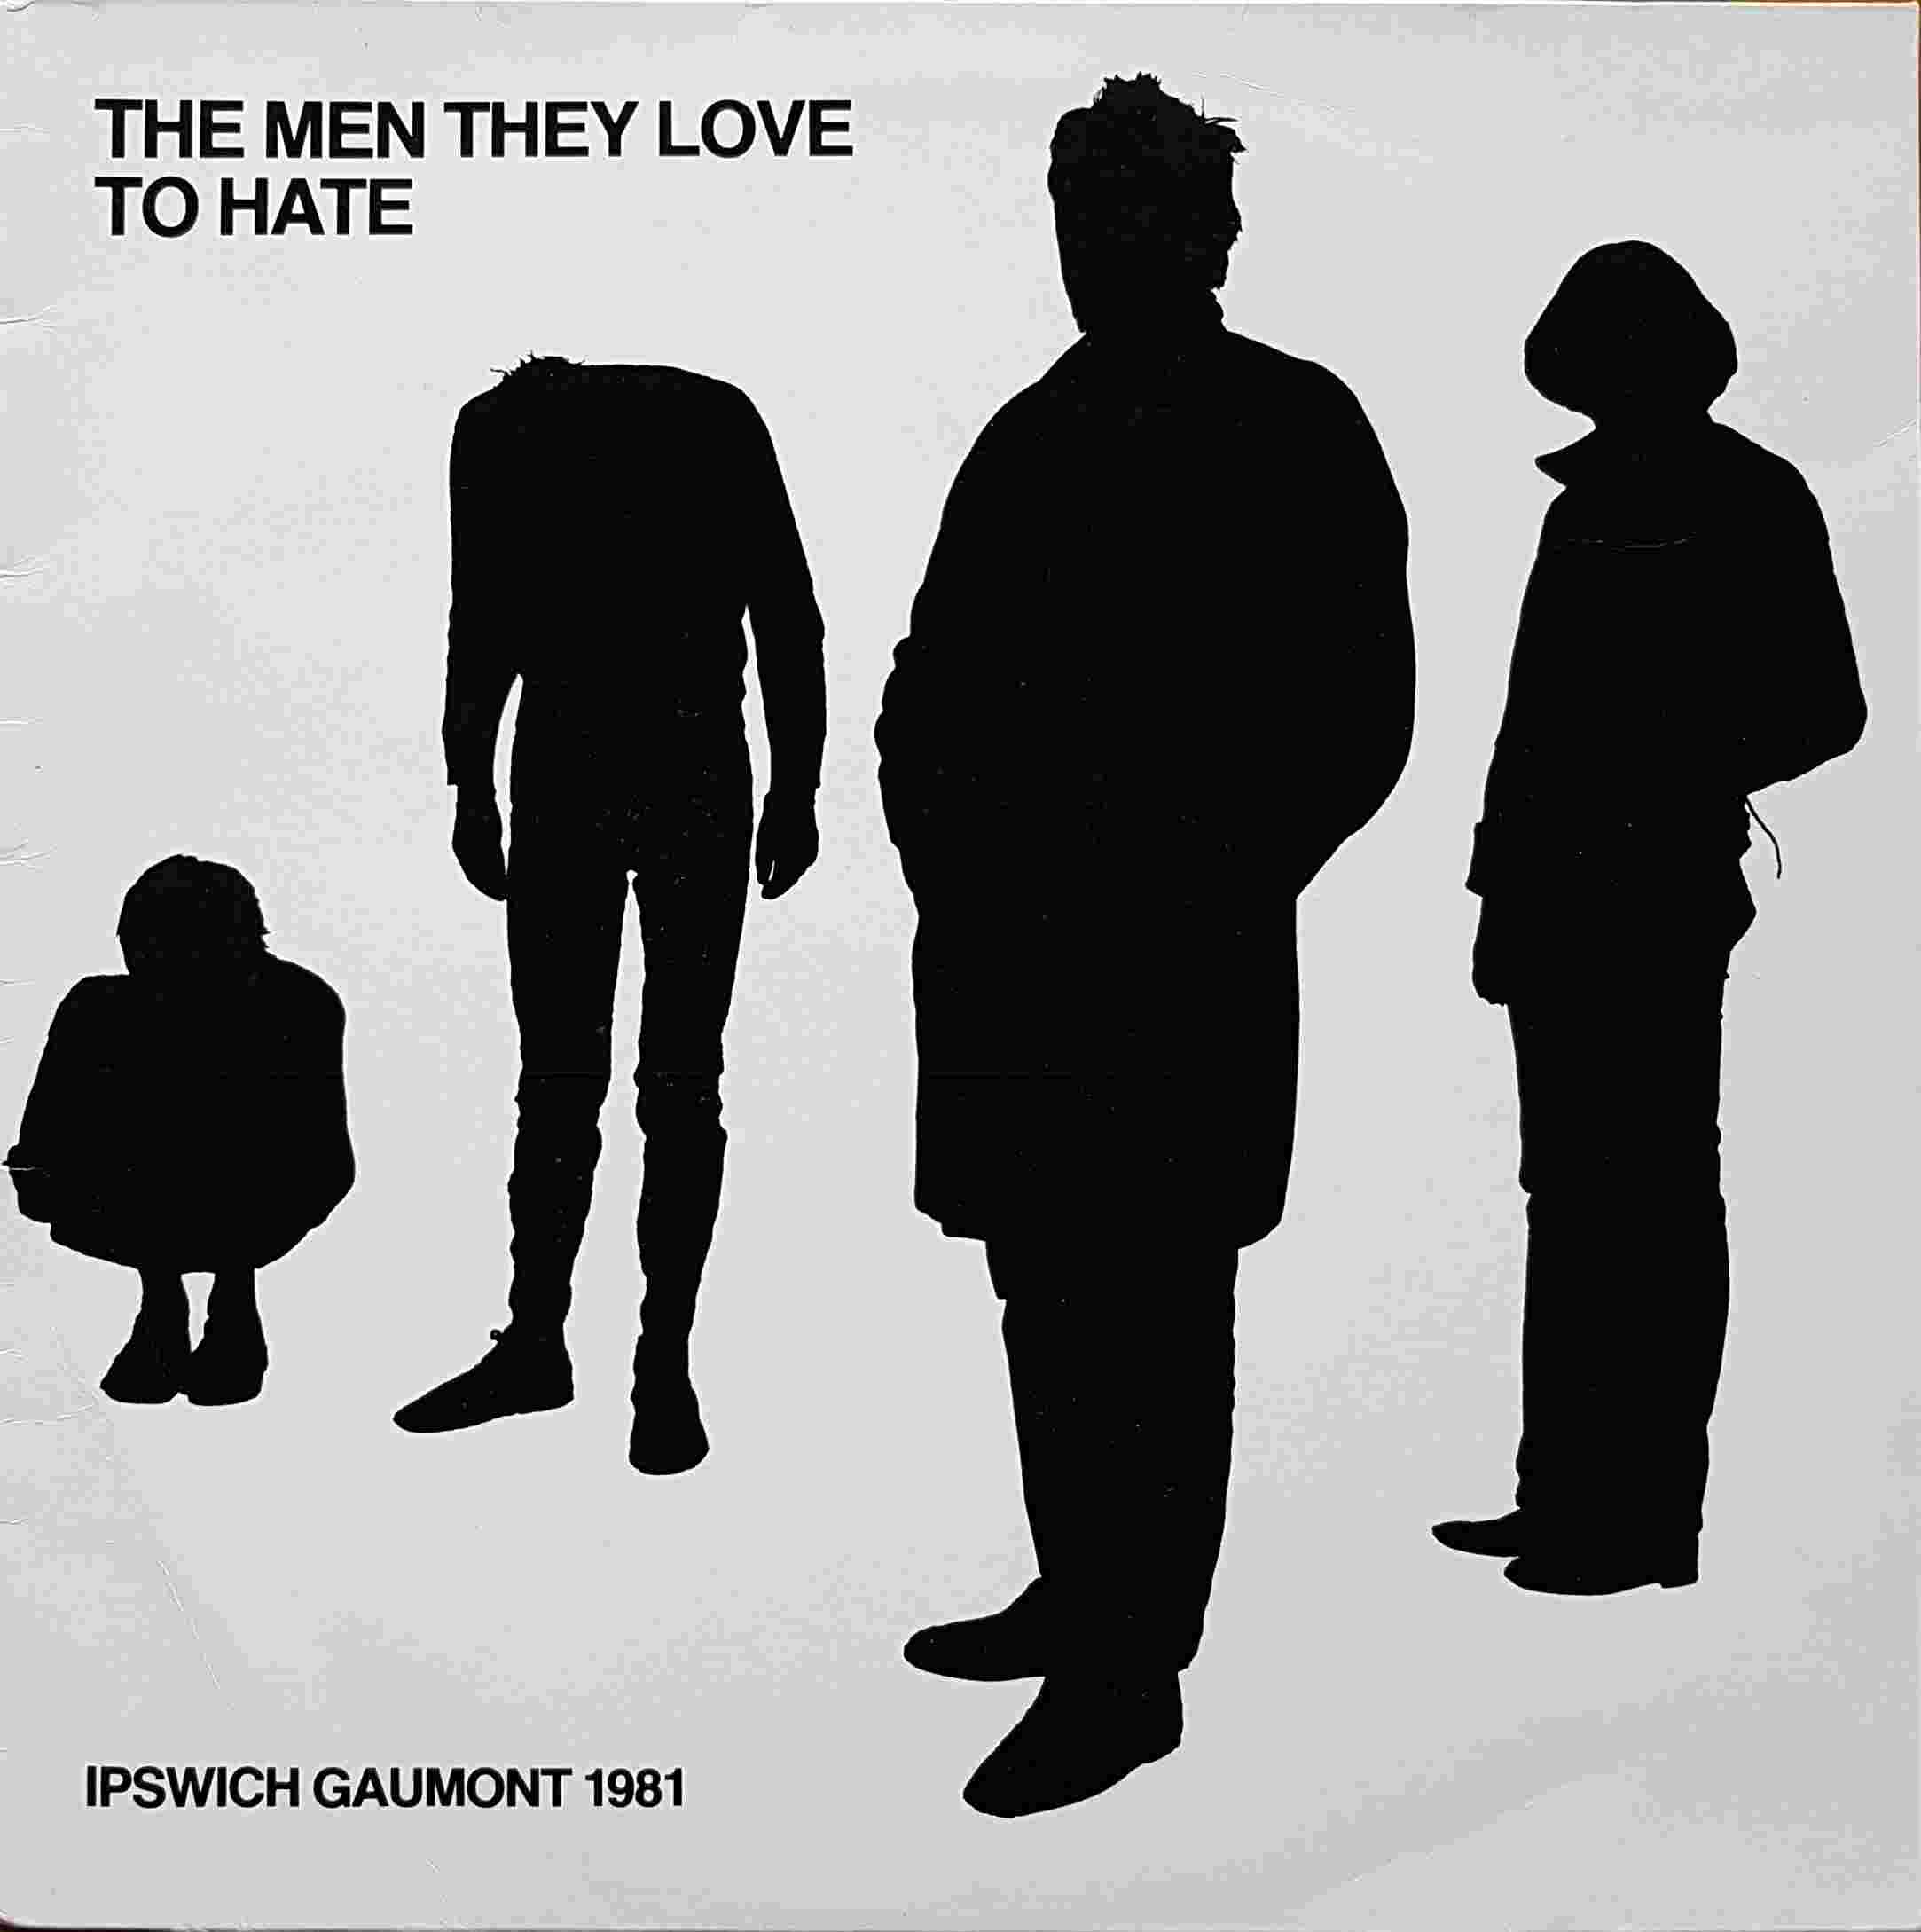 Picture of ACME 004 The men they love to hate - Live at Ipswich 1981 by artist The Stranglers  from The Stranglers